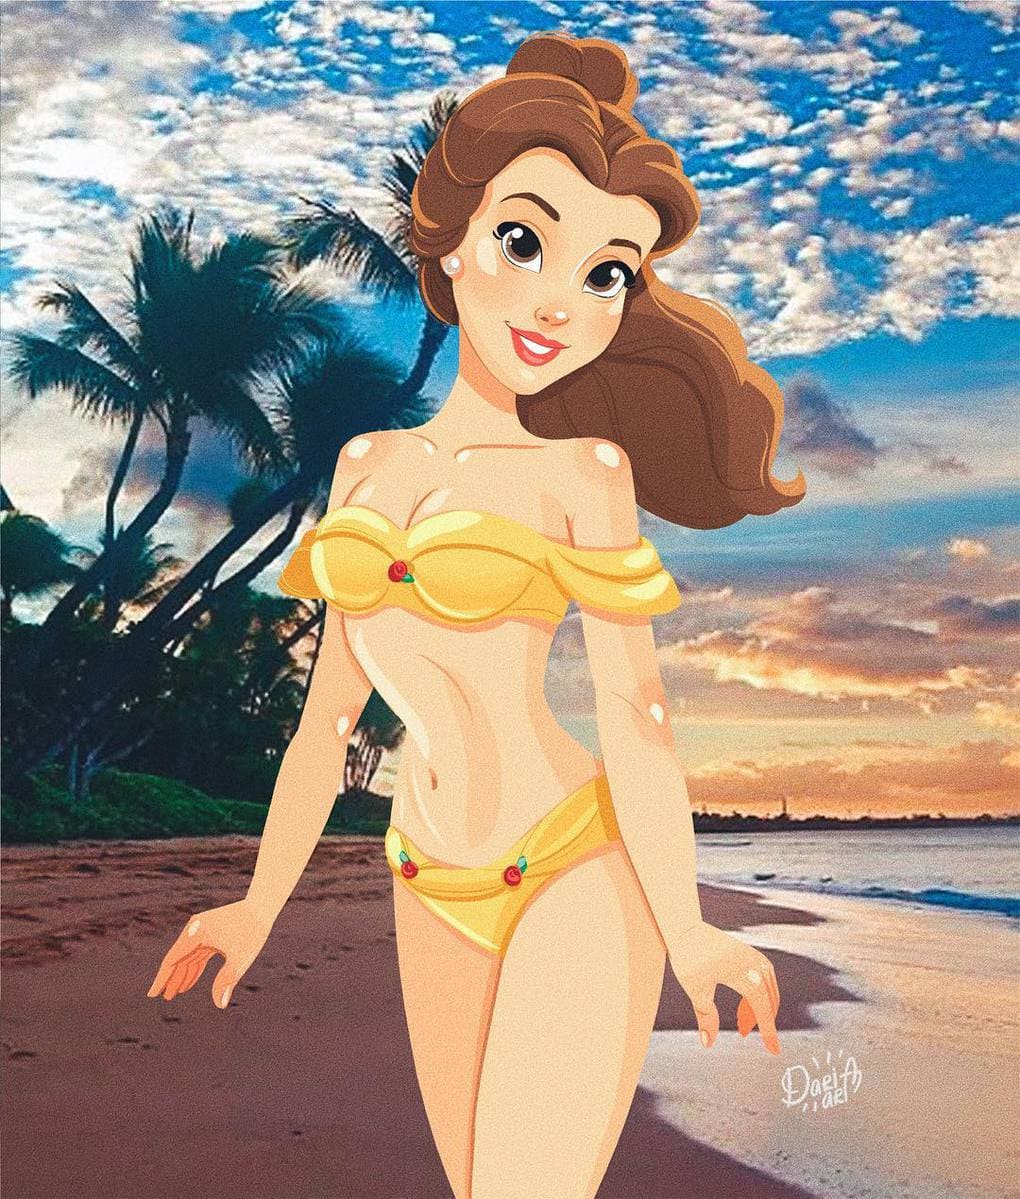 Disney Princess in swimsuits with real backgrounds.